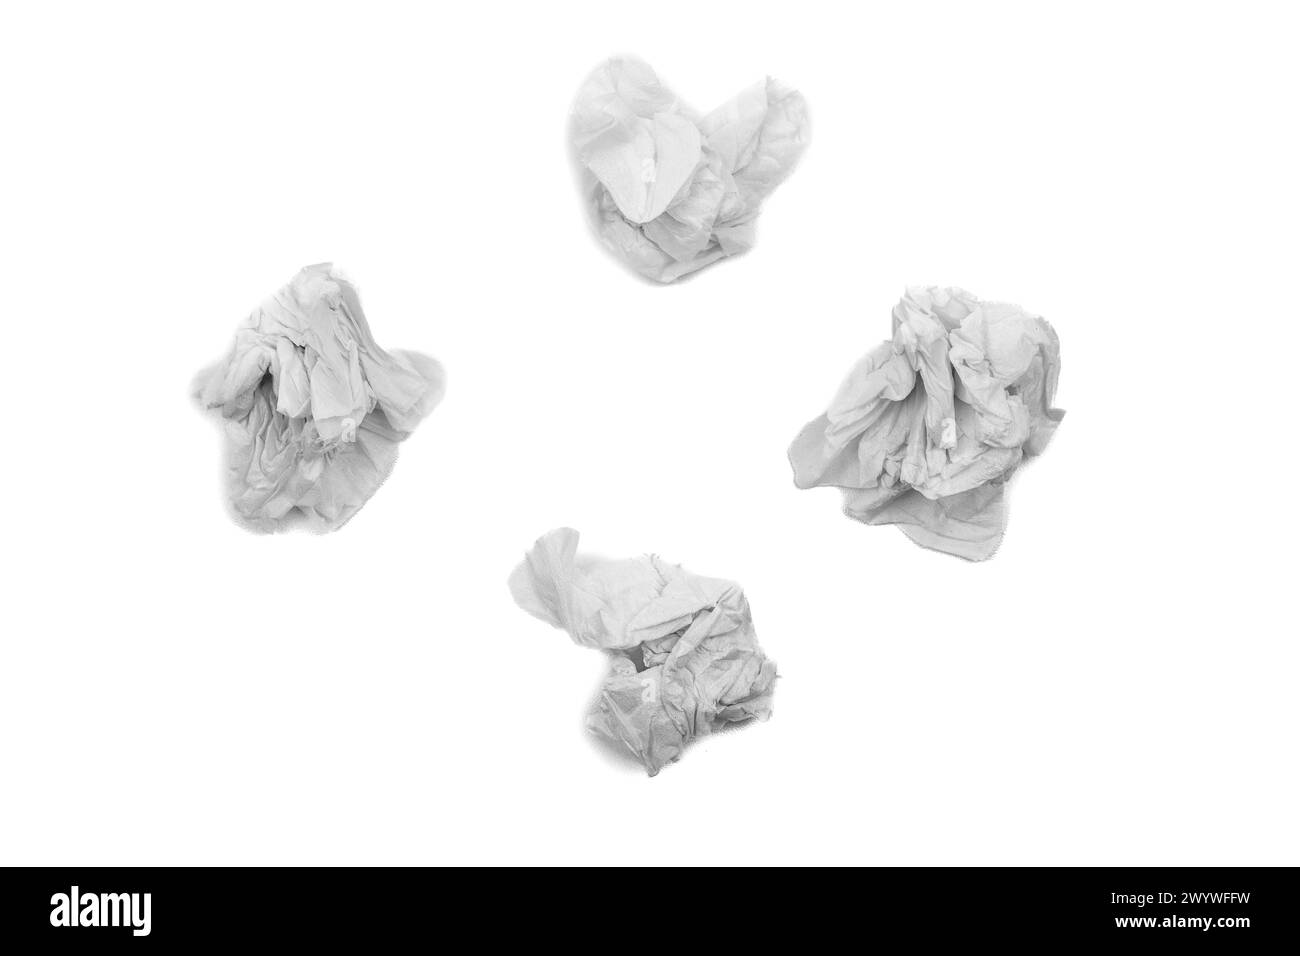 Set of crumpled tissue paper. Used screwed paper tissue isolated on white background. Personal hygiene Stock Photo